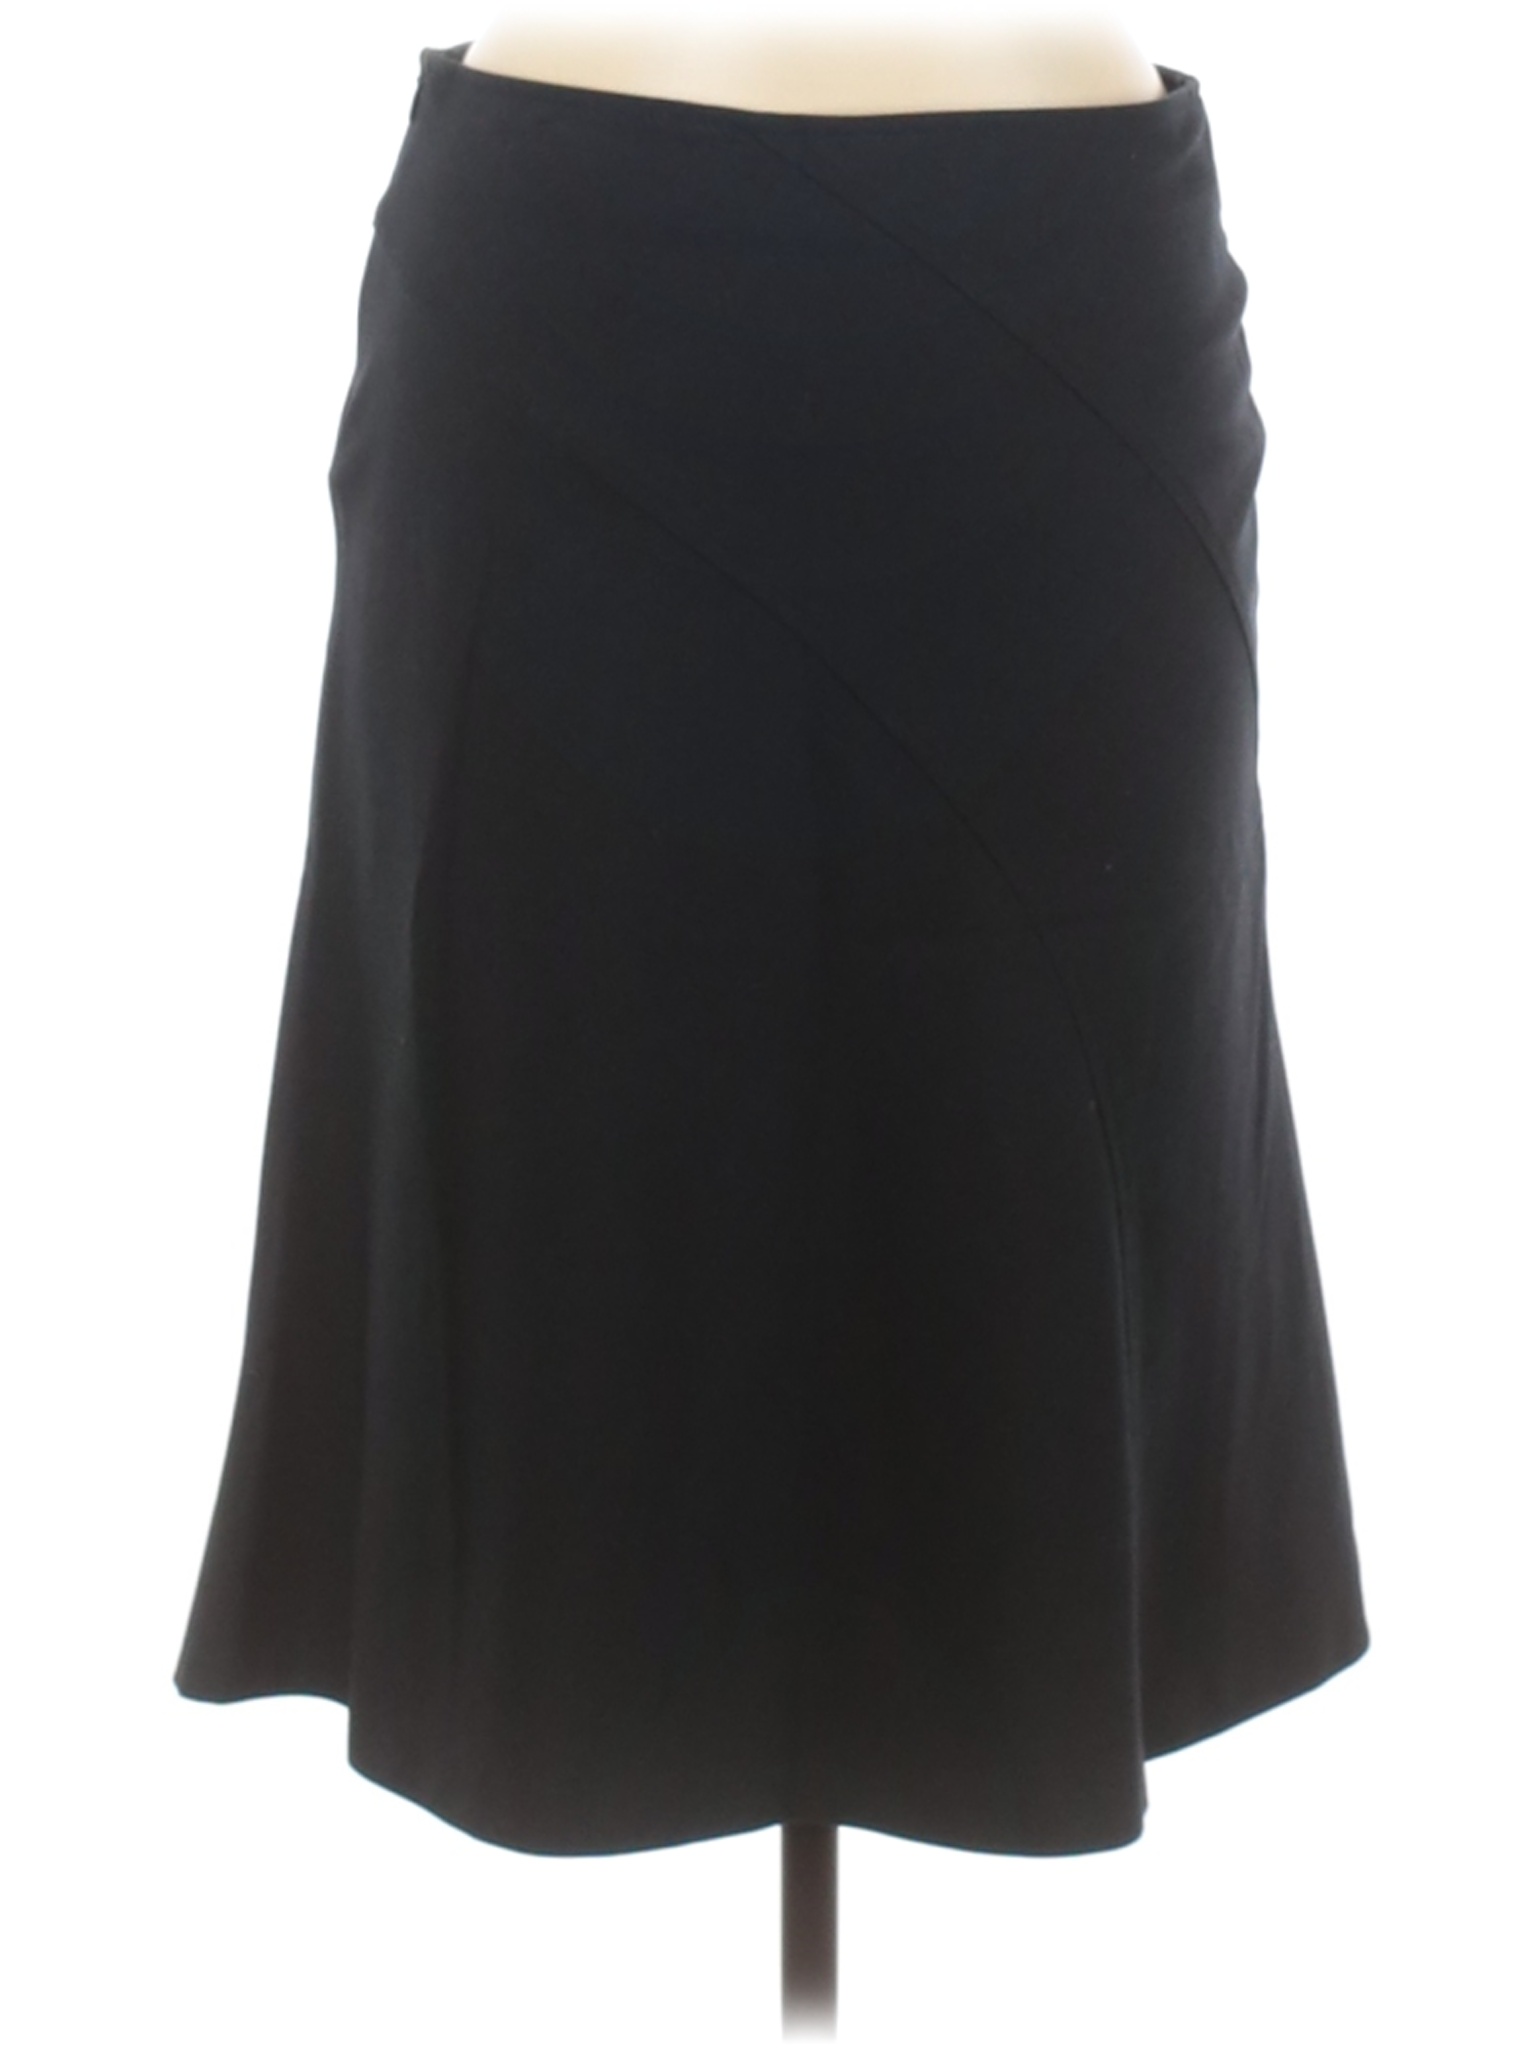 United Colors Of Benetton Solid Black Gray Casual Skirt Size 40 (EU ...